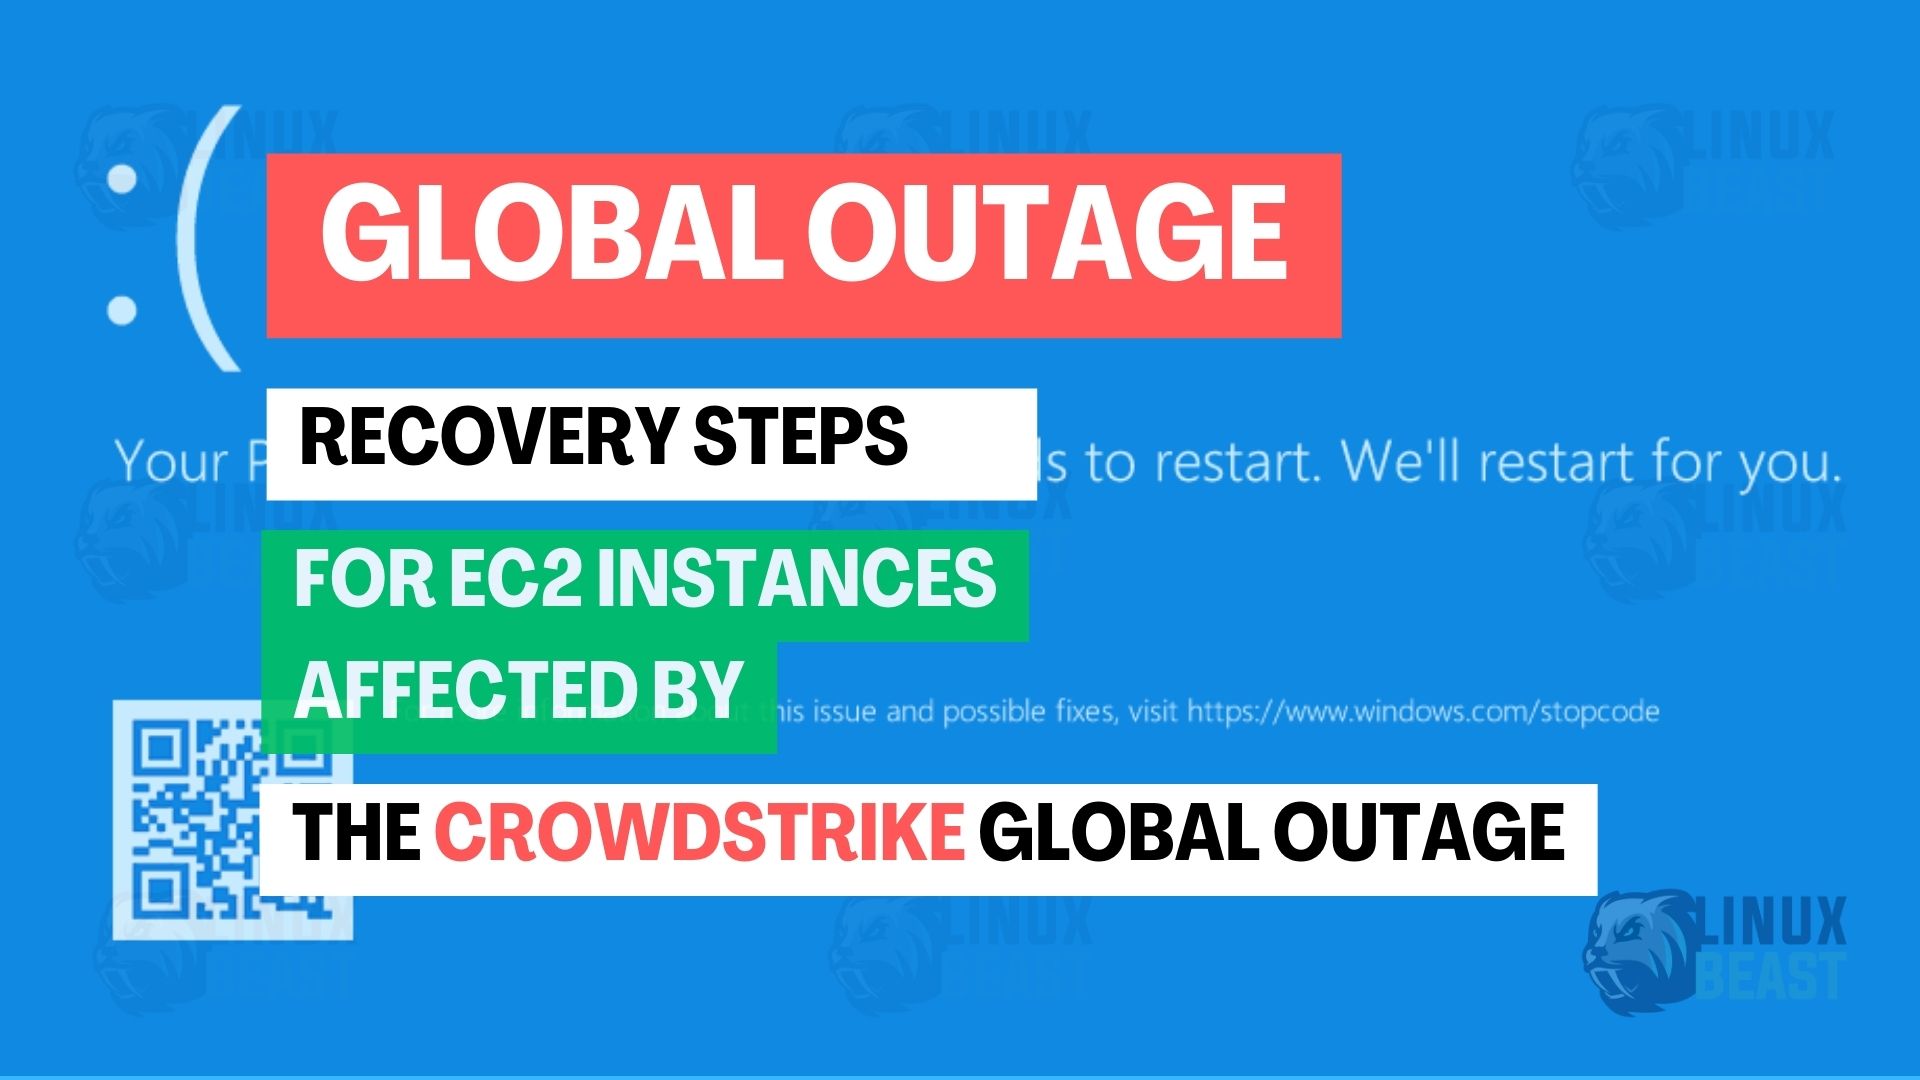 Recovery Steps for EC2 Instances Affected by the CrowdStrike Global Outage